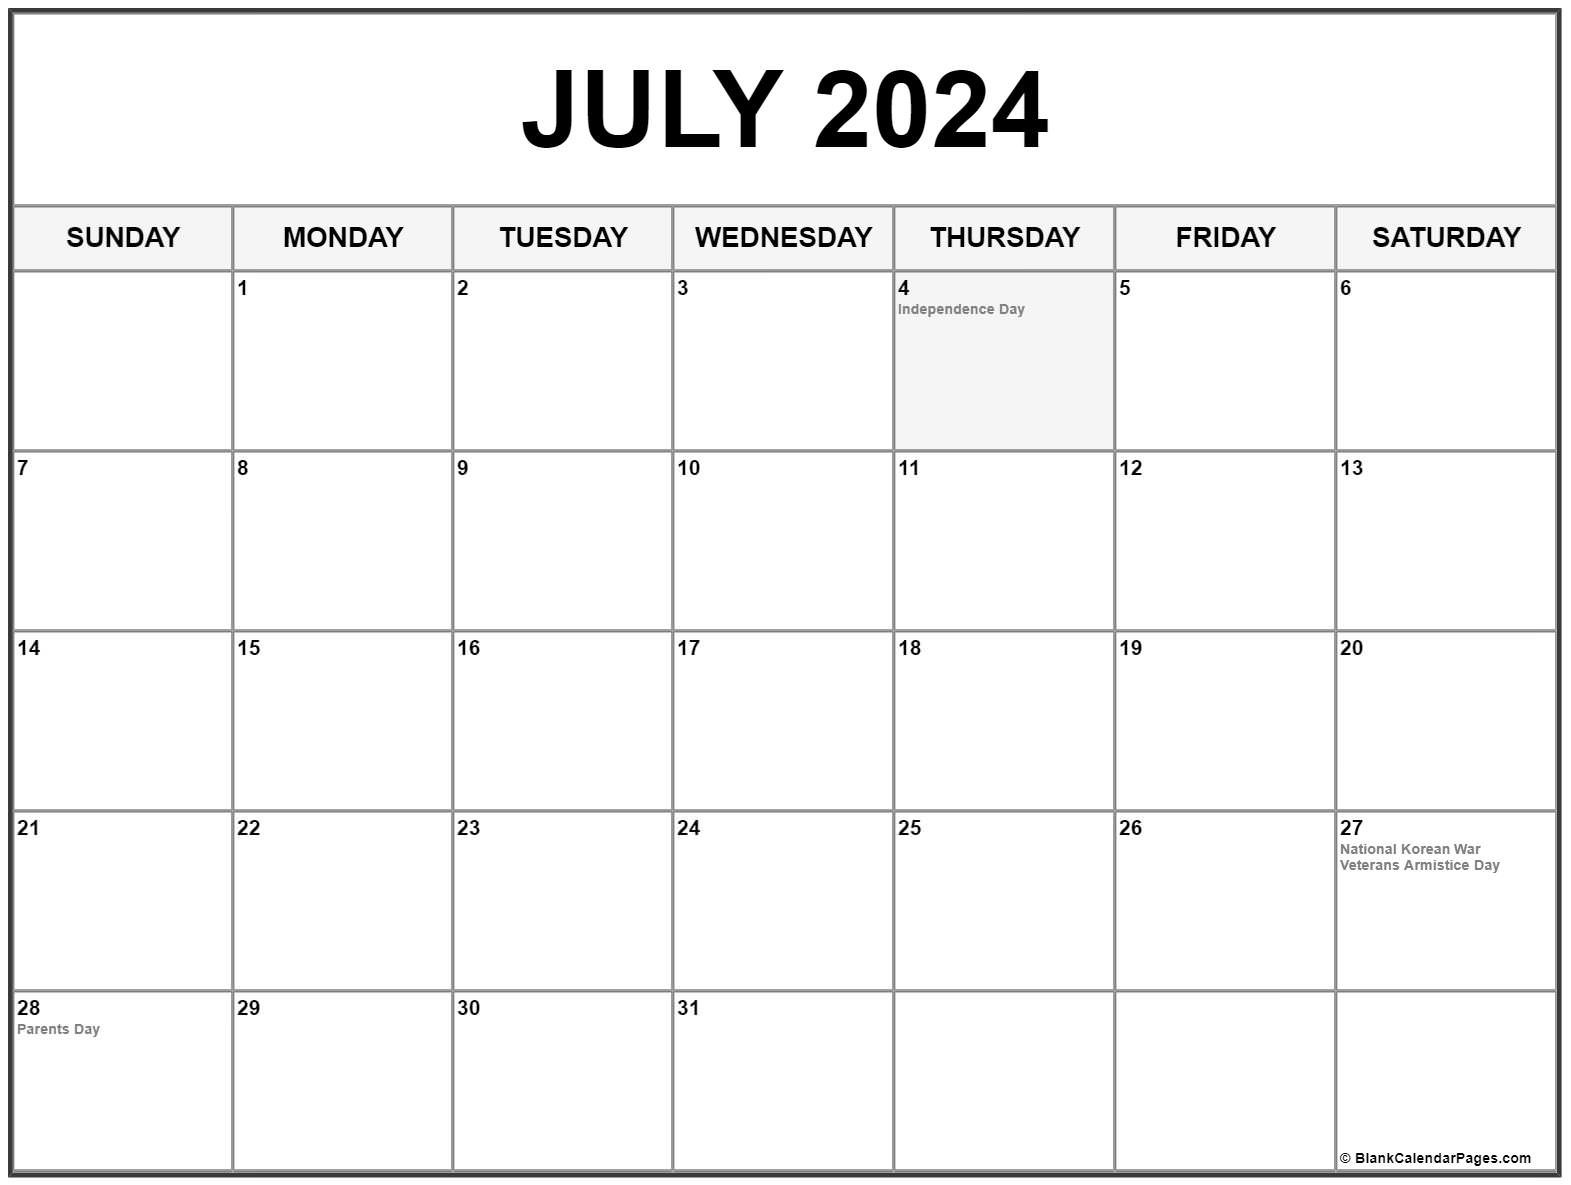 July 2024 With Holidays Calendar | July 2024 Calendar With Holidays Printable Free